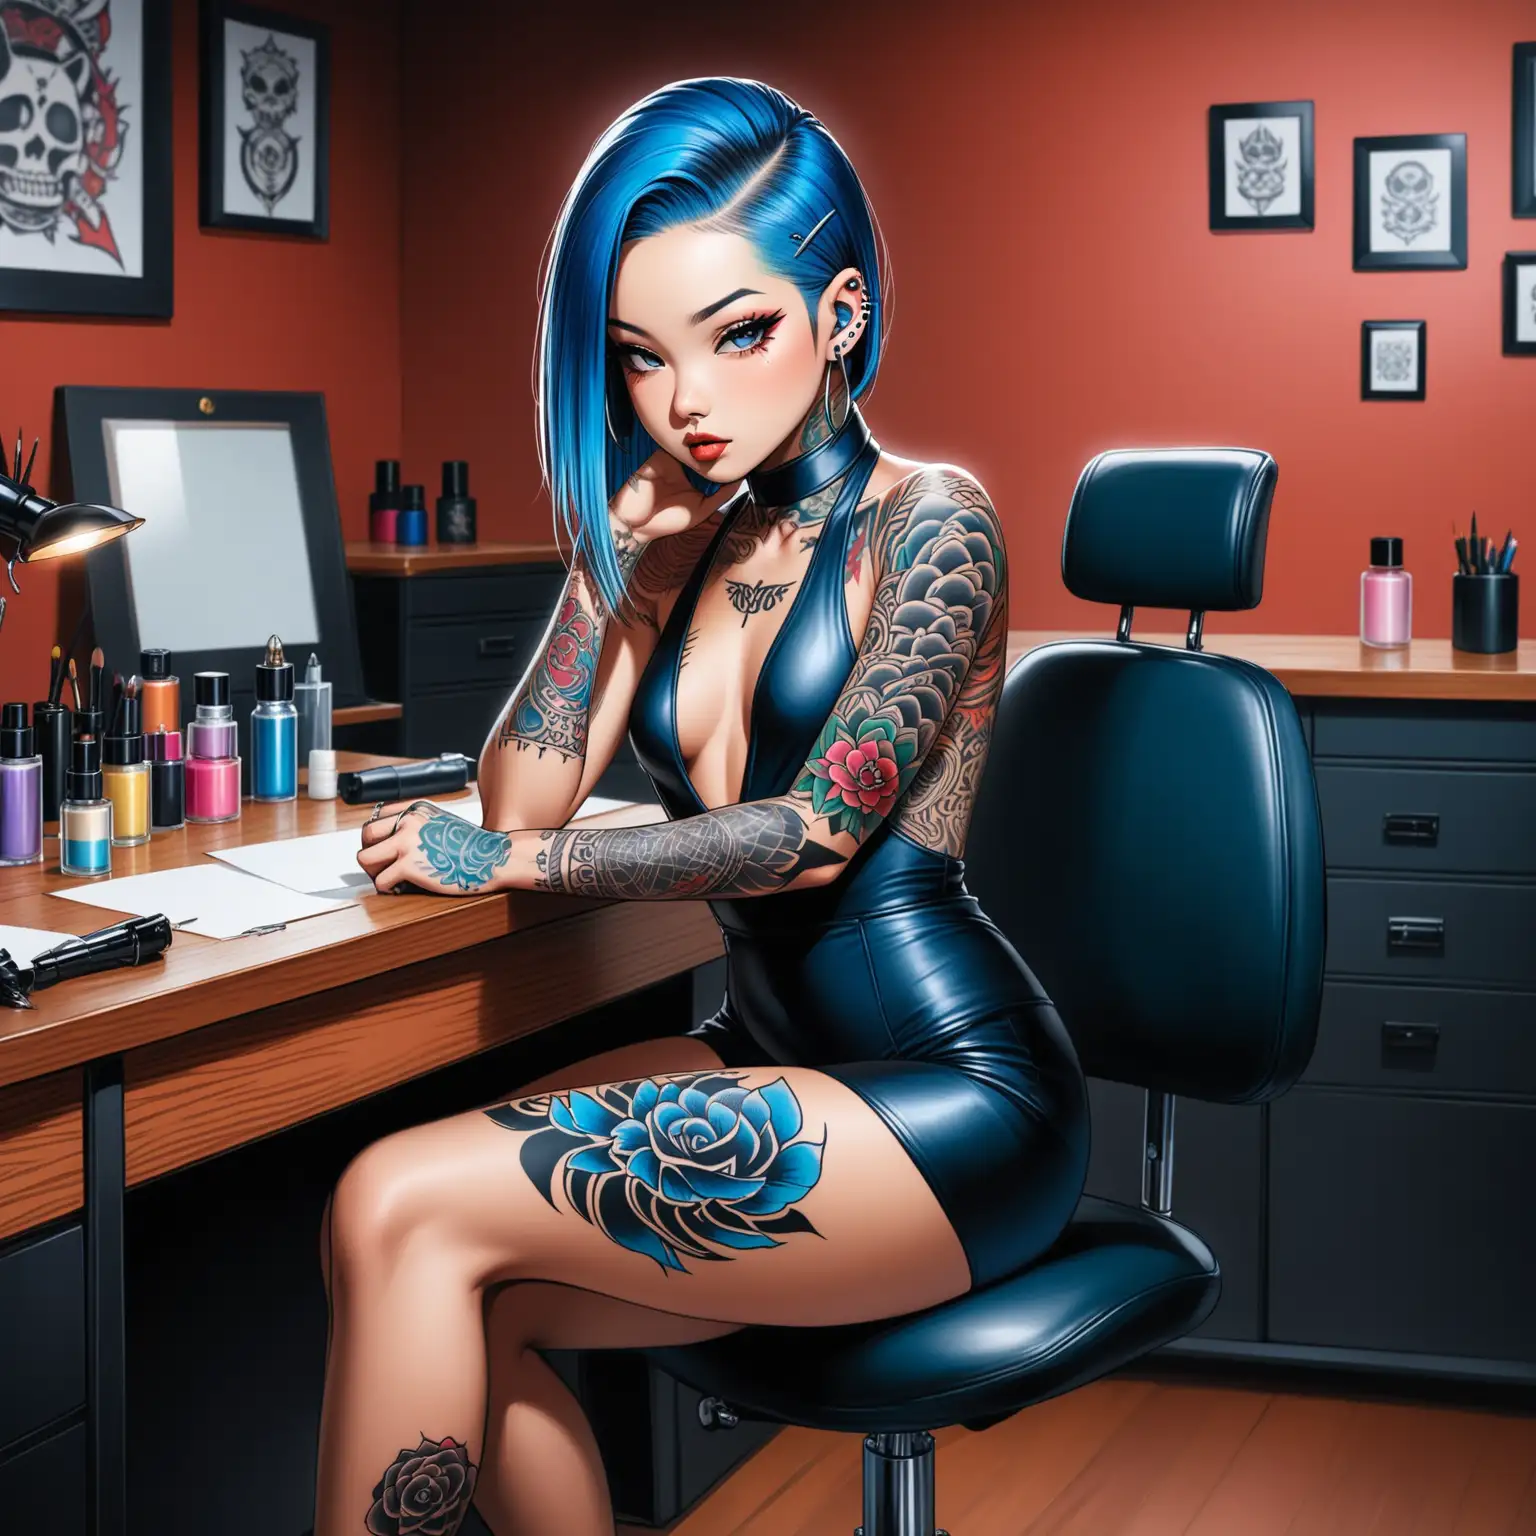 A beautiful girl is sitting on her desk at her tattoo studio, wearing a sexy, yet practical outfit. She is a sultry, petite half-Filipino and half-Korean girl with small breasts, tattoos and piercings. Her blue hair is slicked back, sleek, and has multiple shades of blue running through it. It's a perfect mix of edgy and classic.